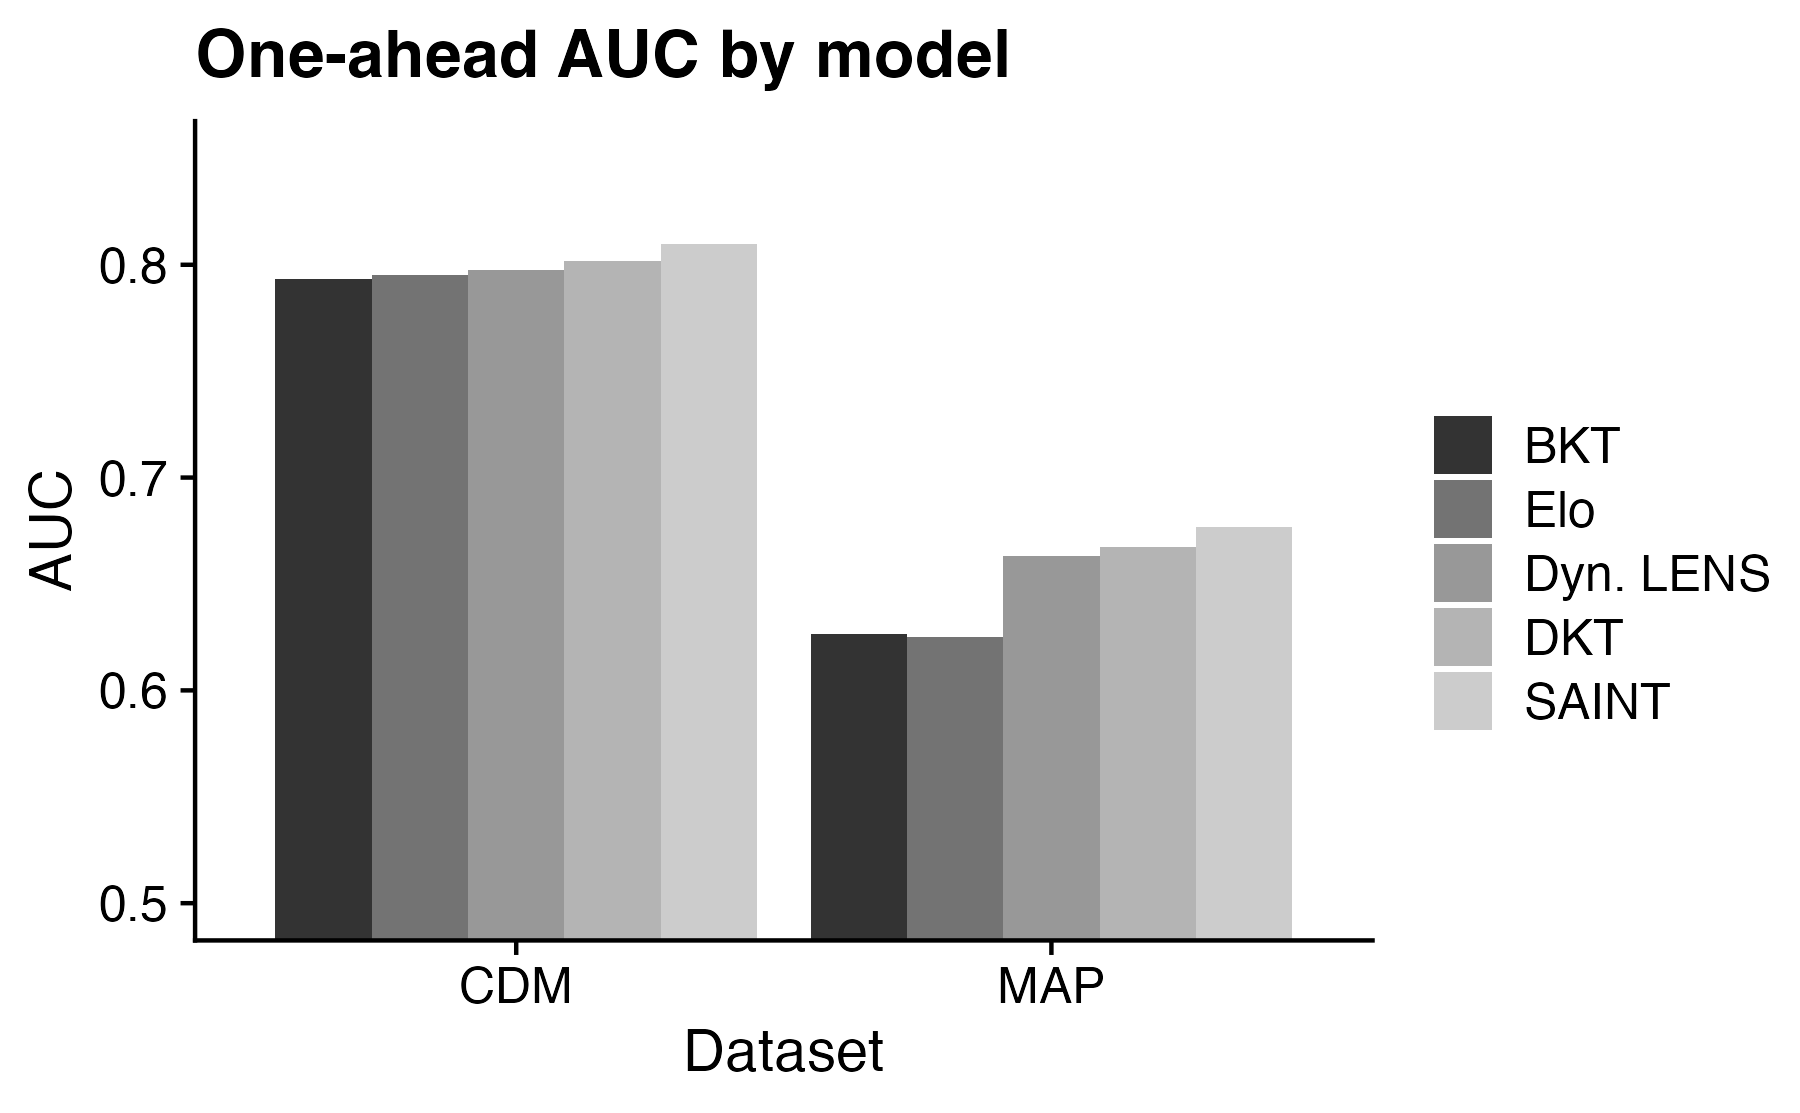 Bar chart showing AUC for each model, predicting responses 1-step-ahead for each student.  The figure shows results for both CDM and MAP datasets. AUC for CDM is comparable across all models, with SAINT performing best, then DKT, then LENS, then Elo, and finally BKT. AUC for MAP is lower overall, with BKT and Elo performing slightly worse than LENS and DKT and SAINT performing slightly better than LENS.